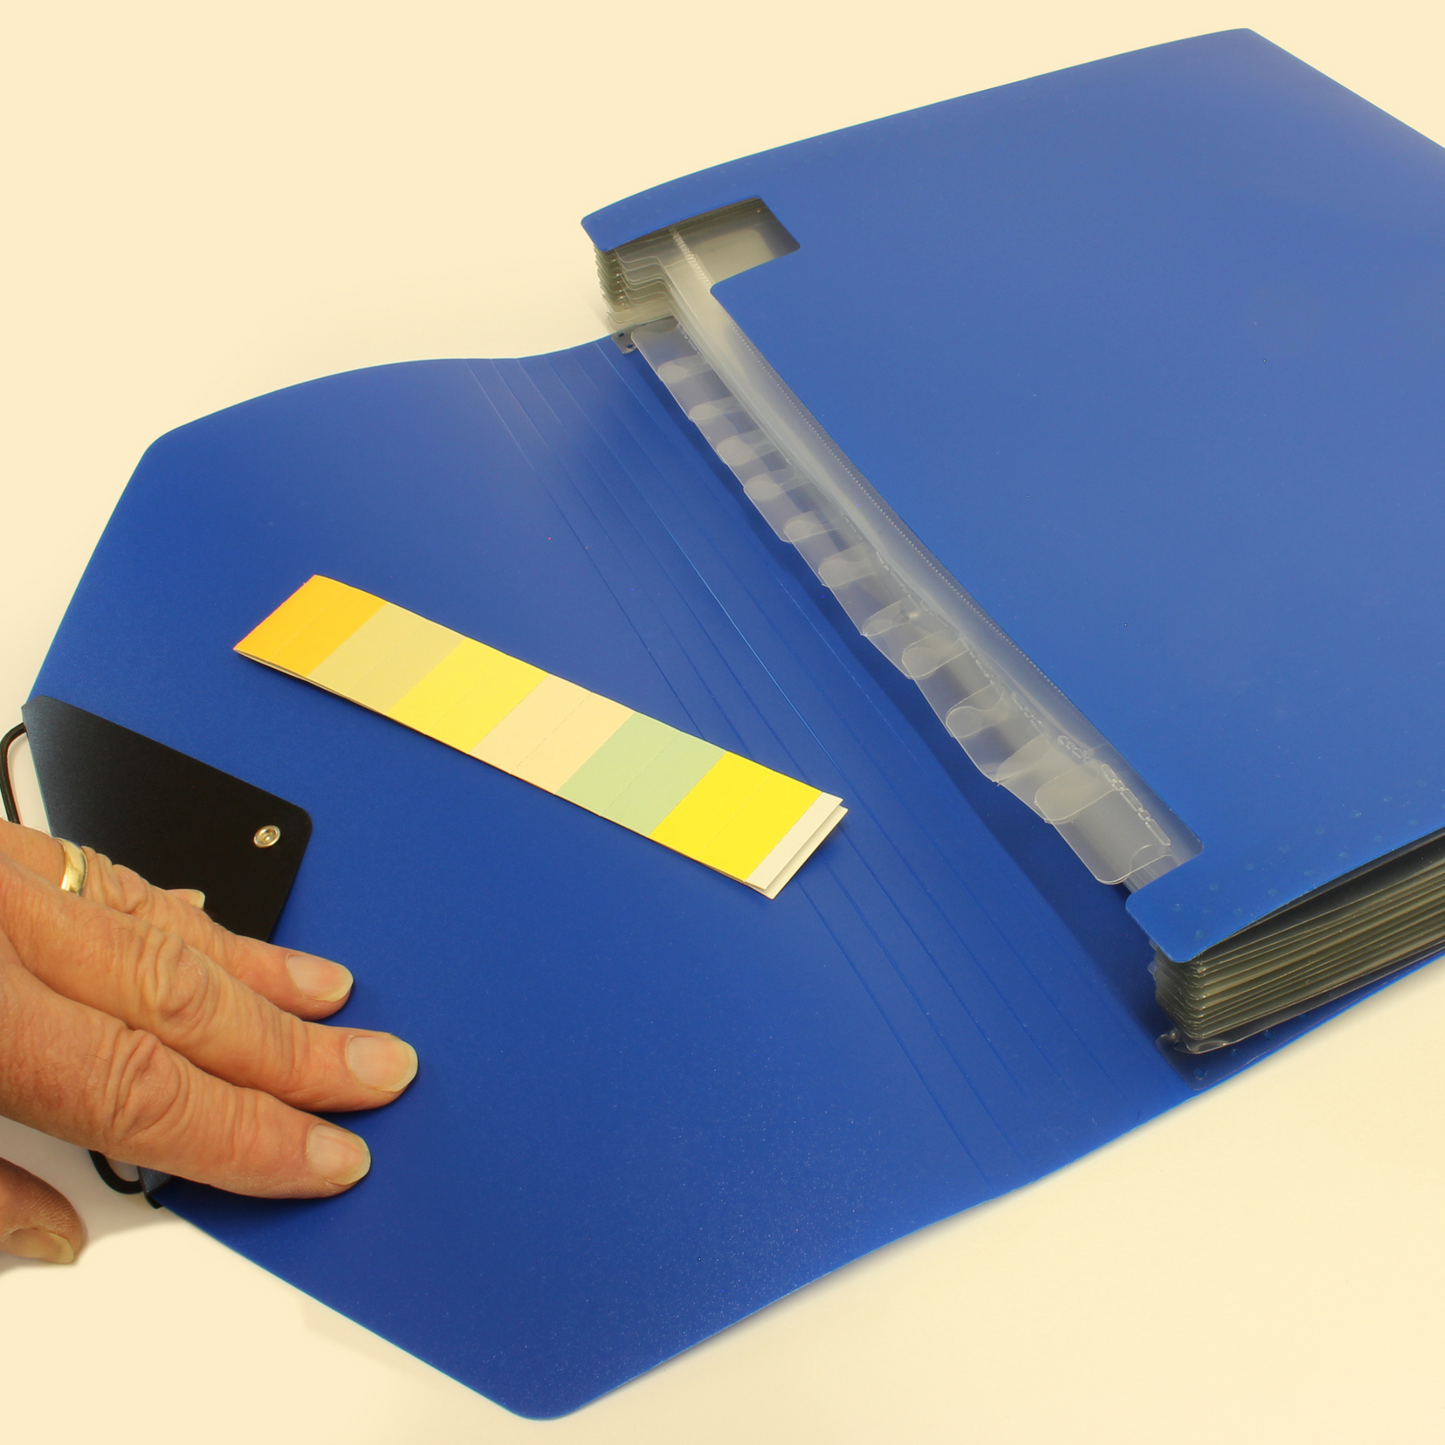 A person's hand is opening a bright blue envelope-style folder, revealing clear plastic dividers with tabs for organizing documents. A series of labels in different shades is placed on the folder's surface, ready to be used for labelling the tabs.